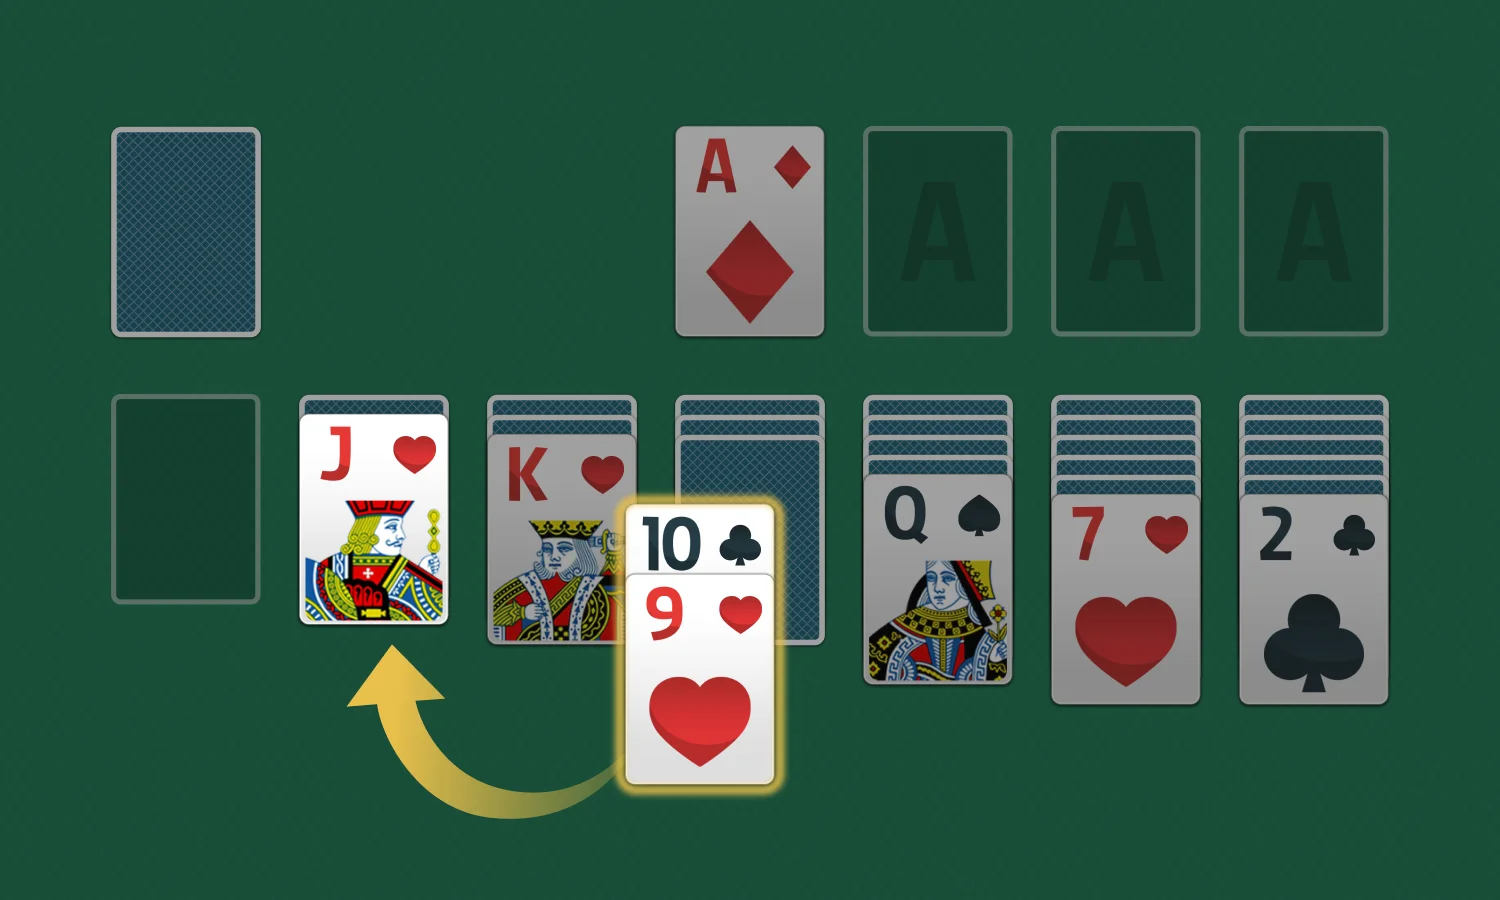 Solitaire Rules: Stack Sequences of Cards